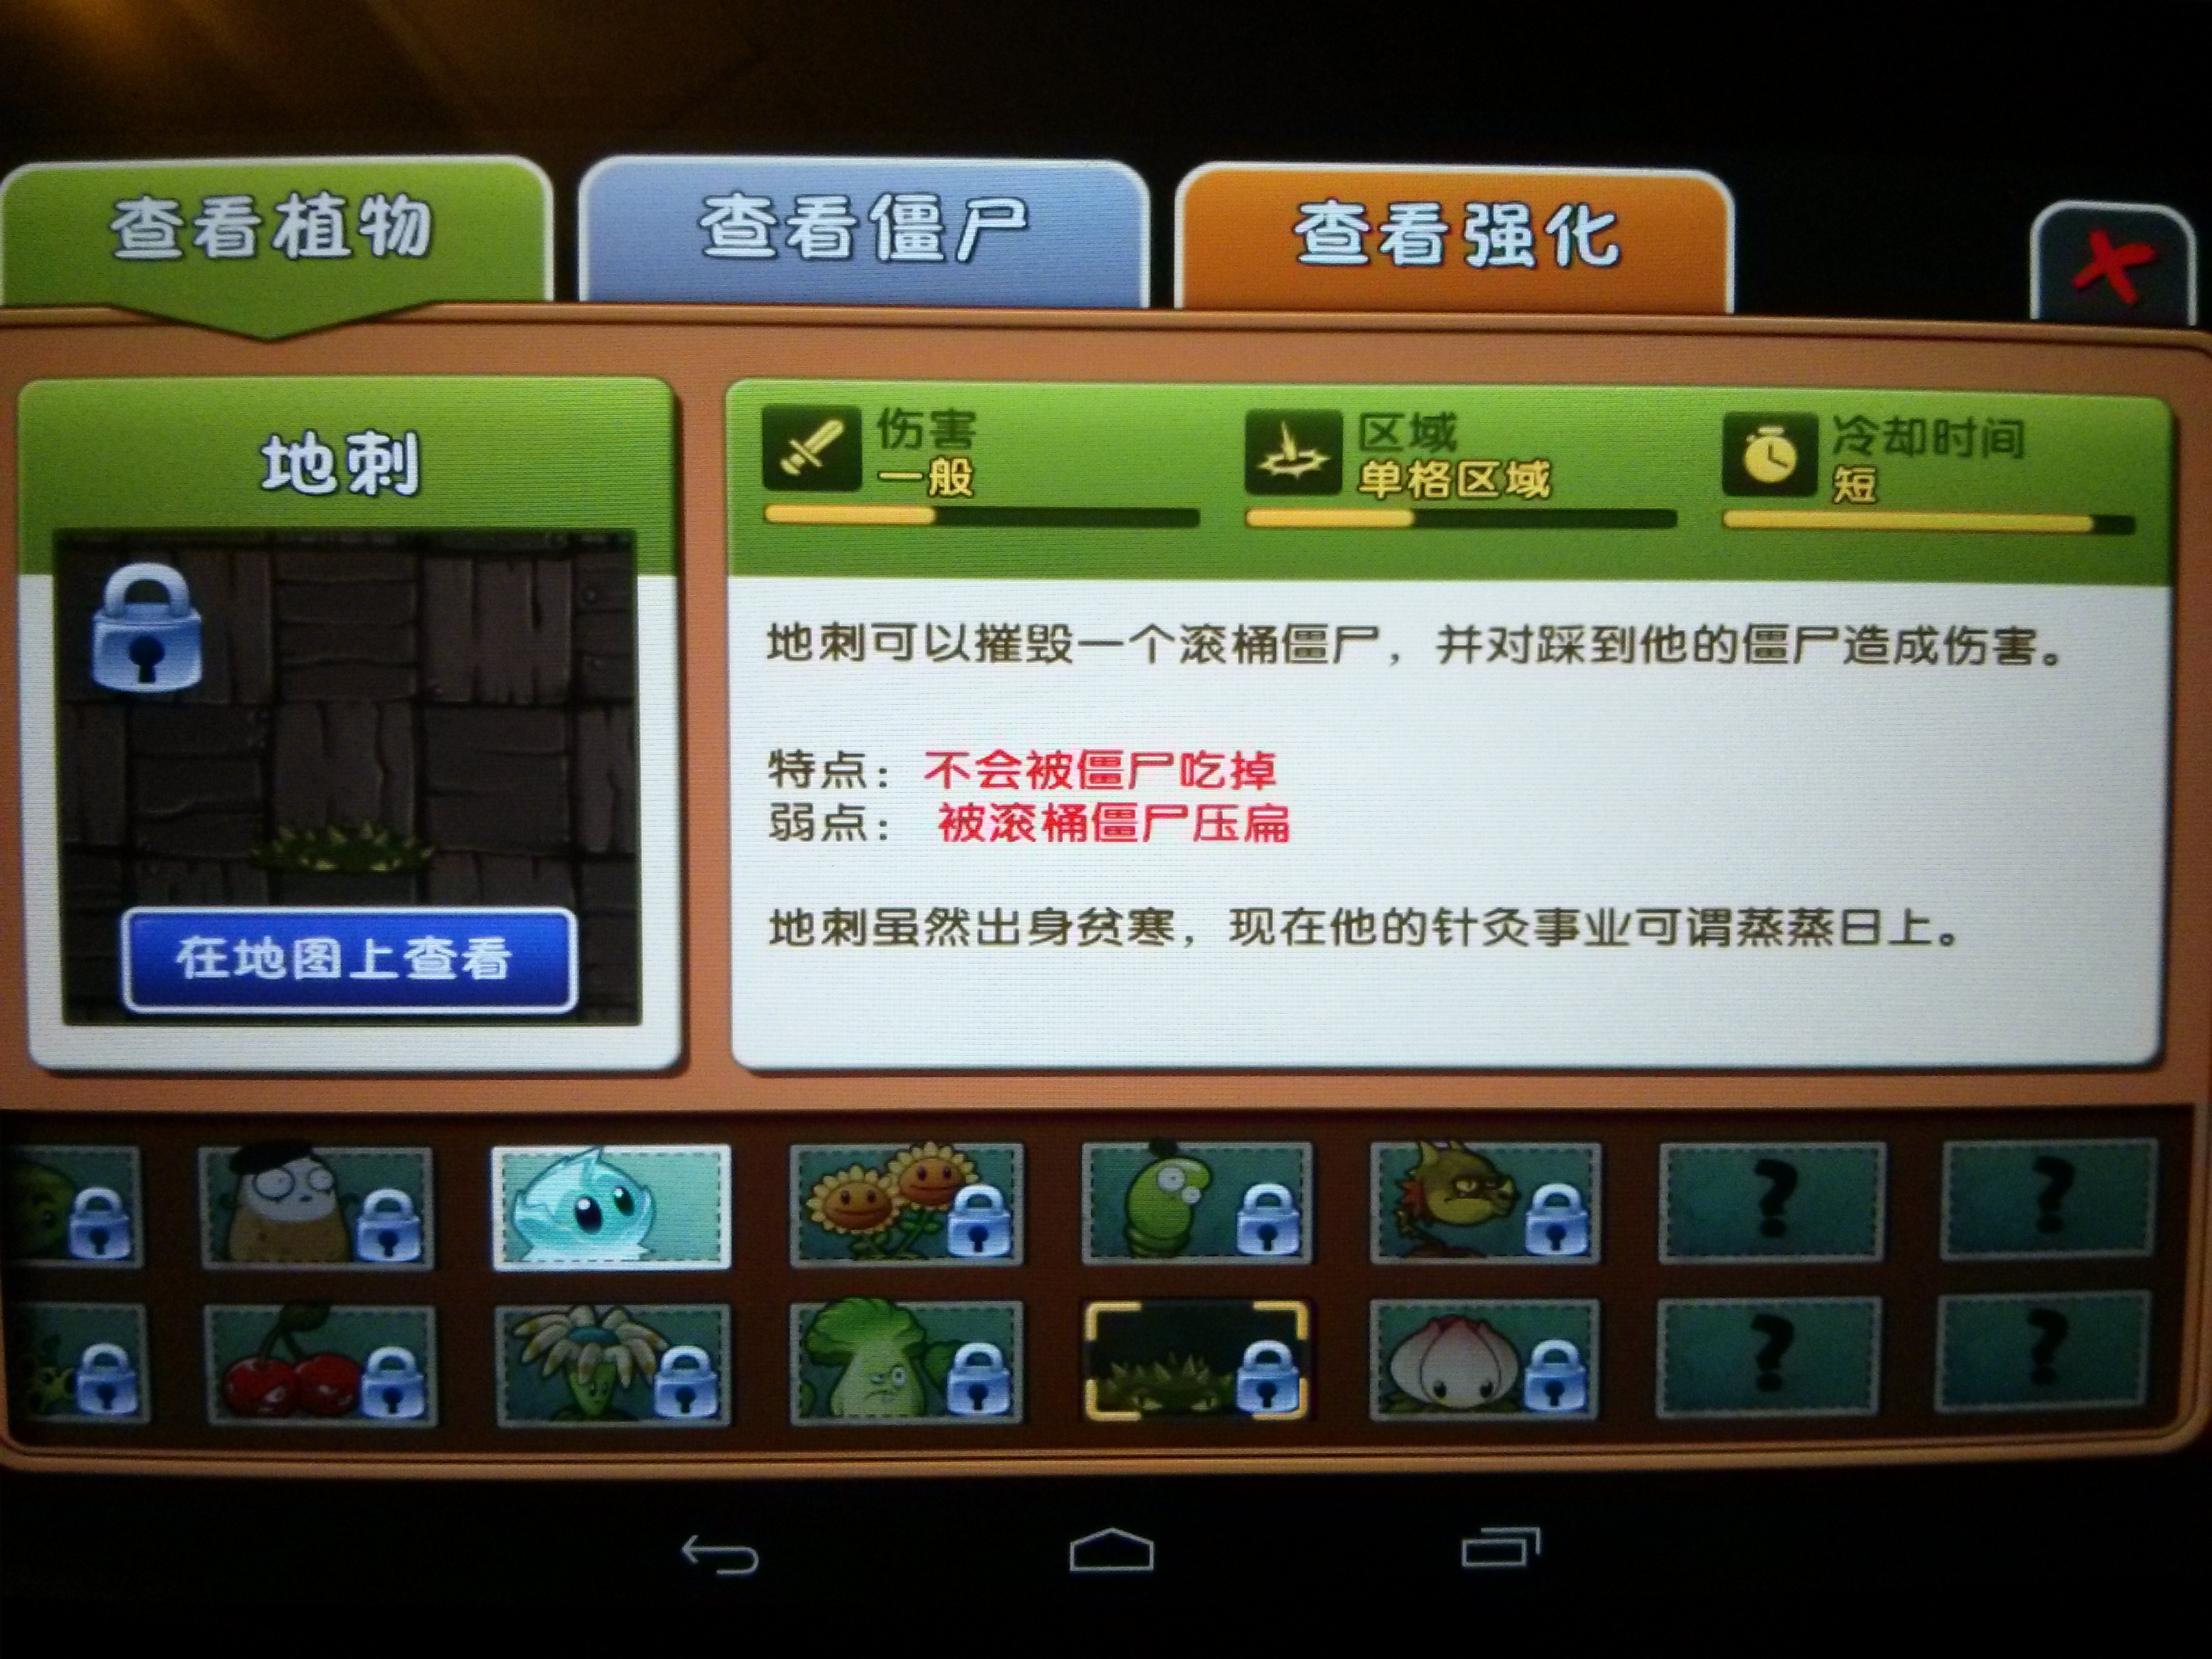 Plants vs Zombies 2: It's About Time – Android (China's APK) difference  from the original